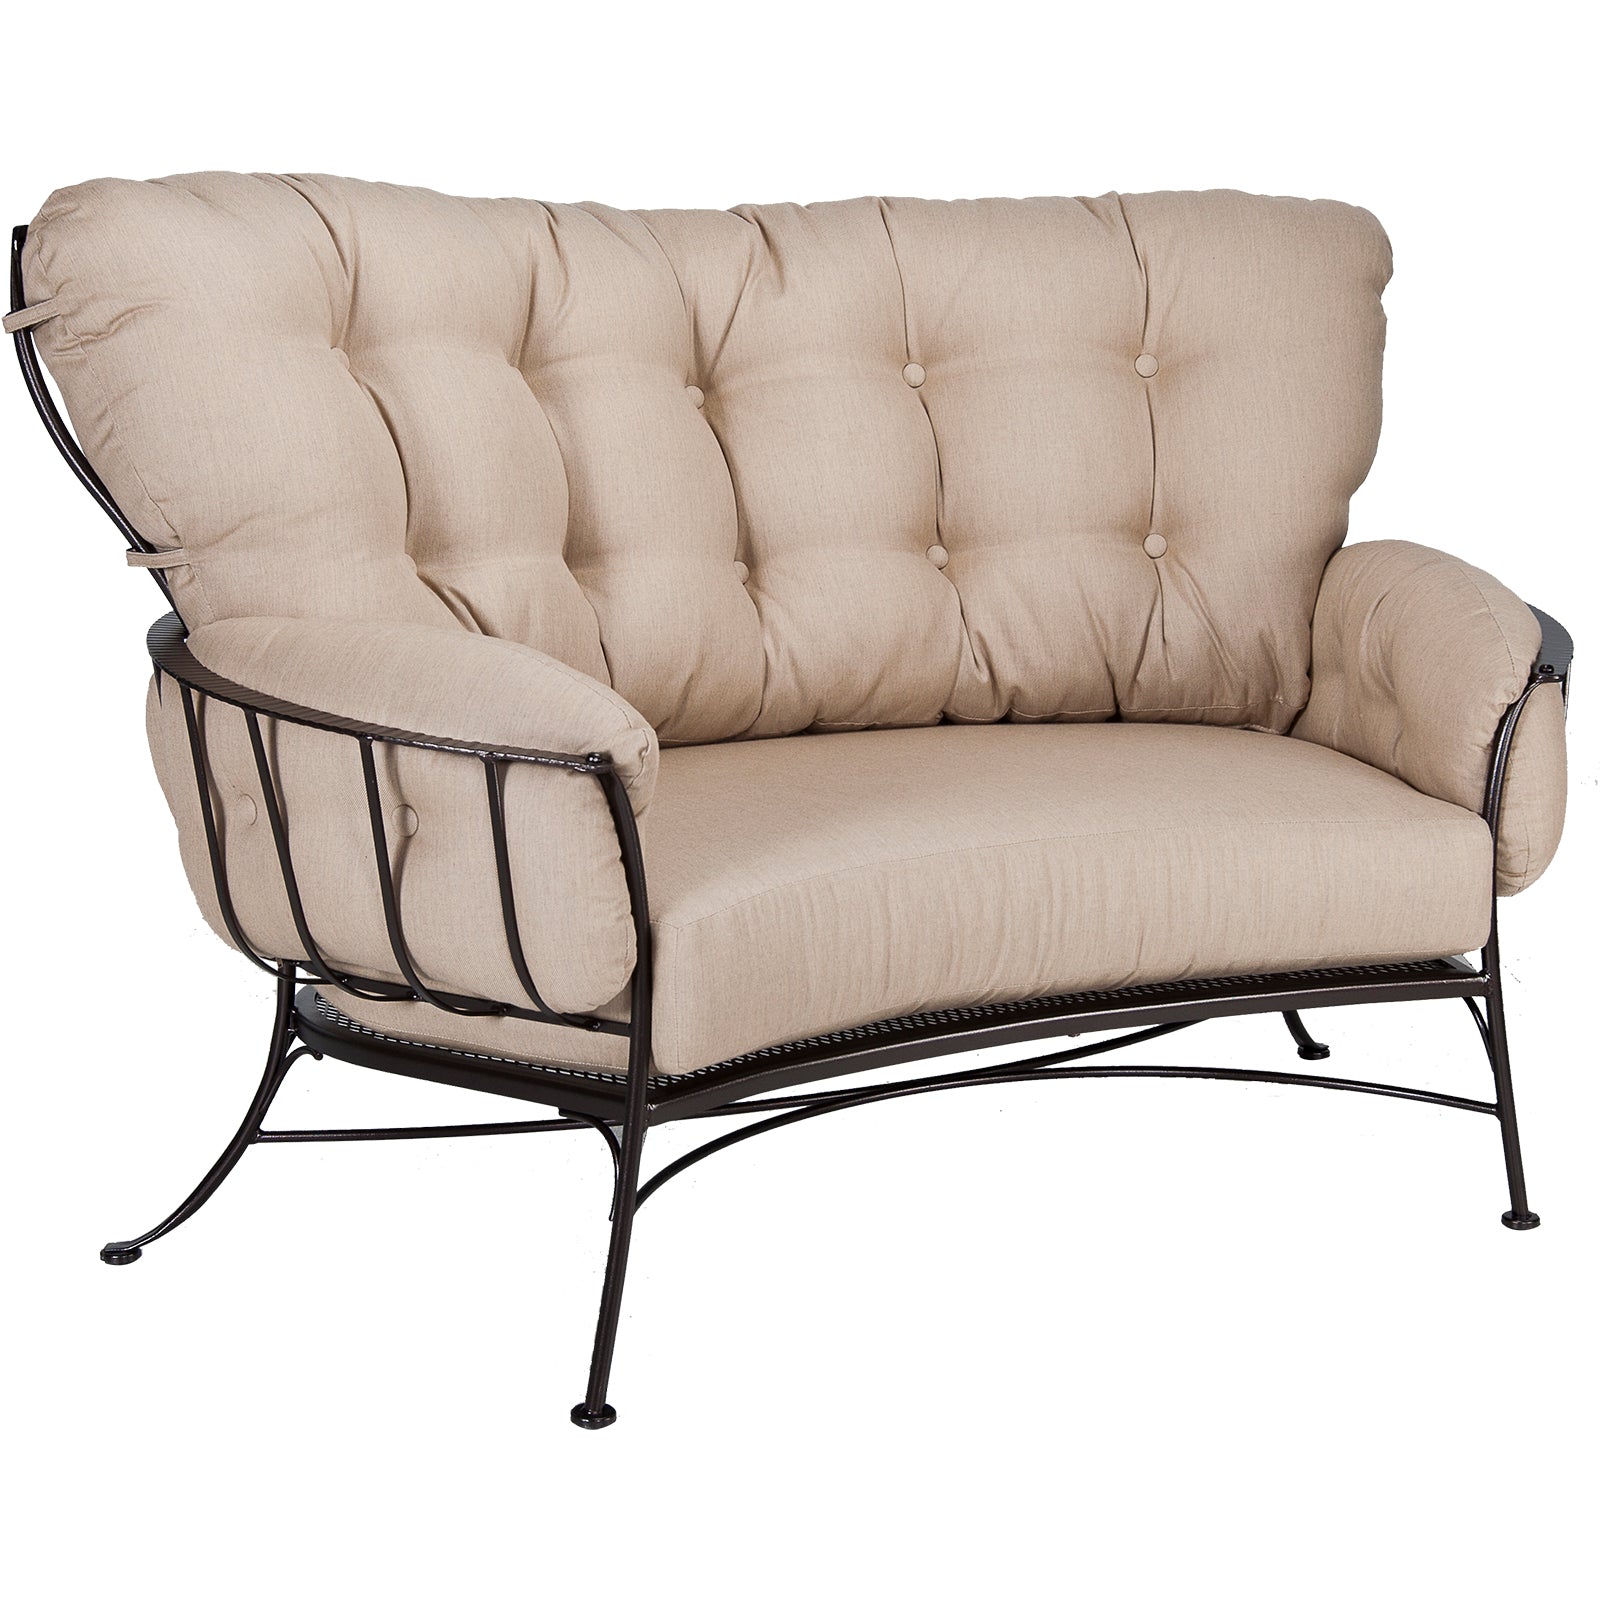 Monterra Urban Scale Crescent Love Seat by Ow Lee